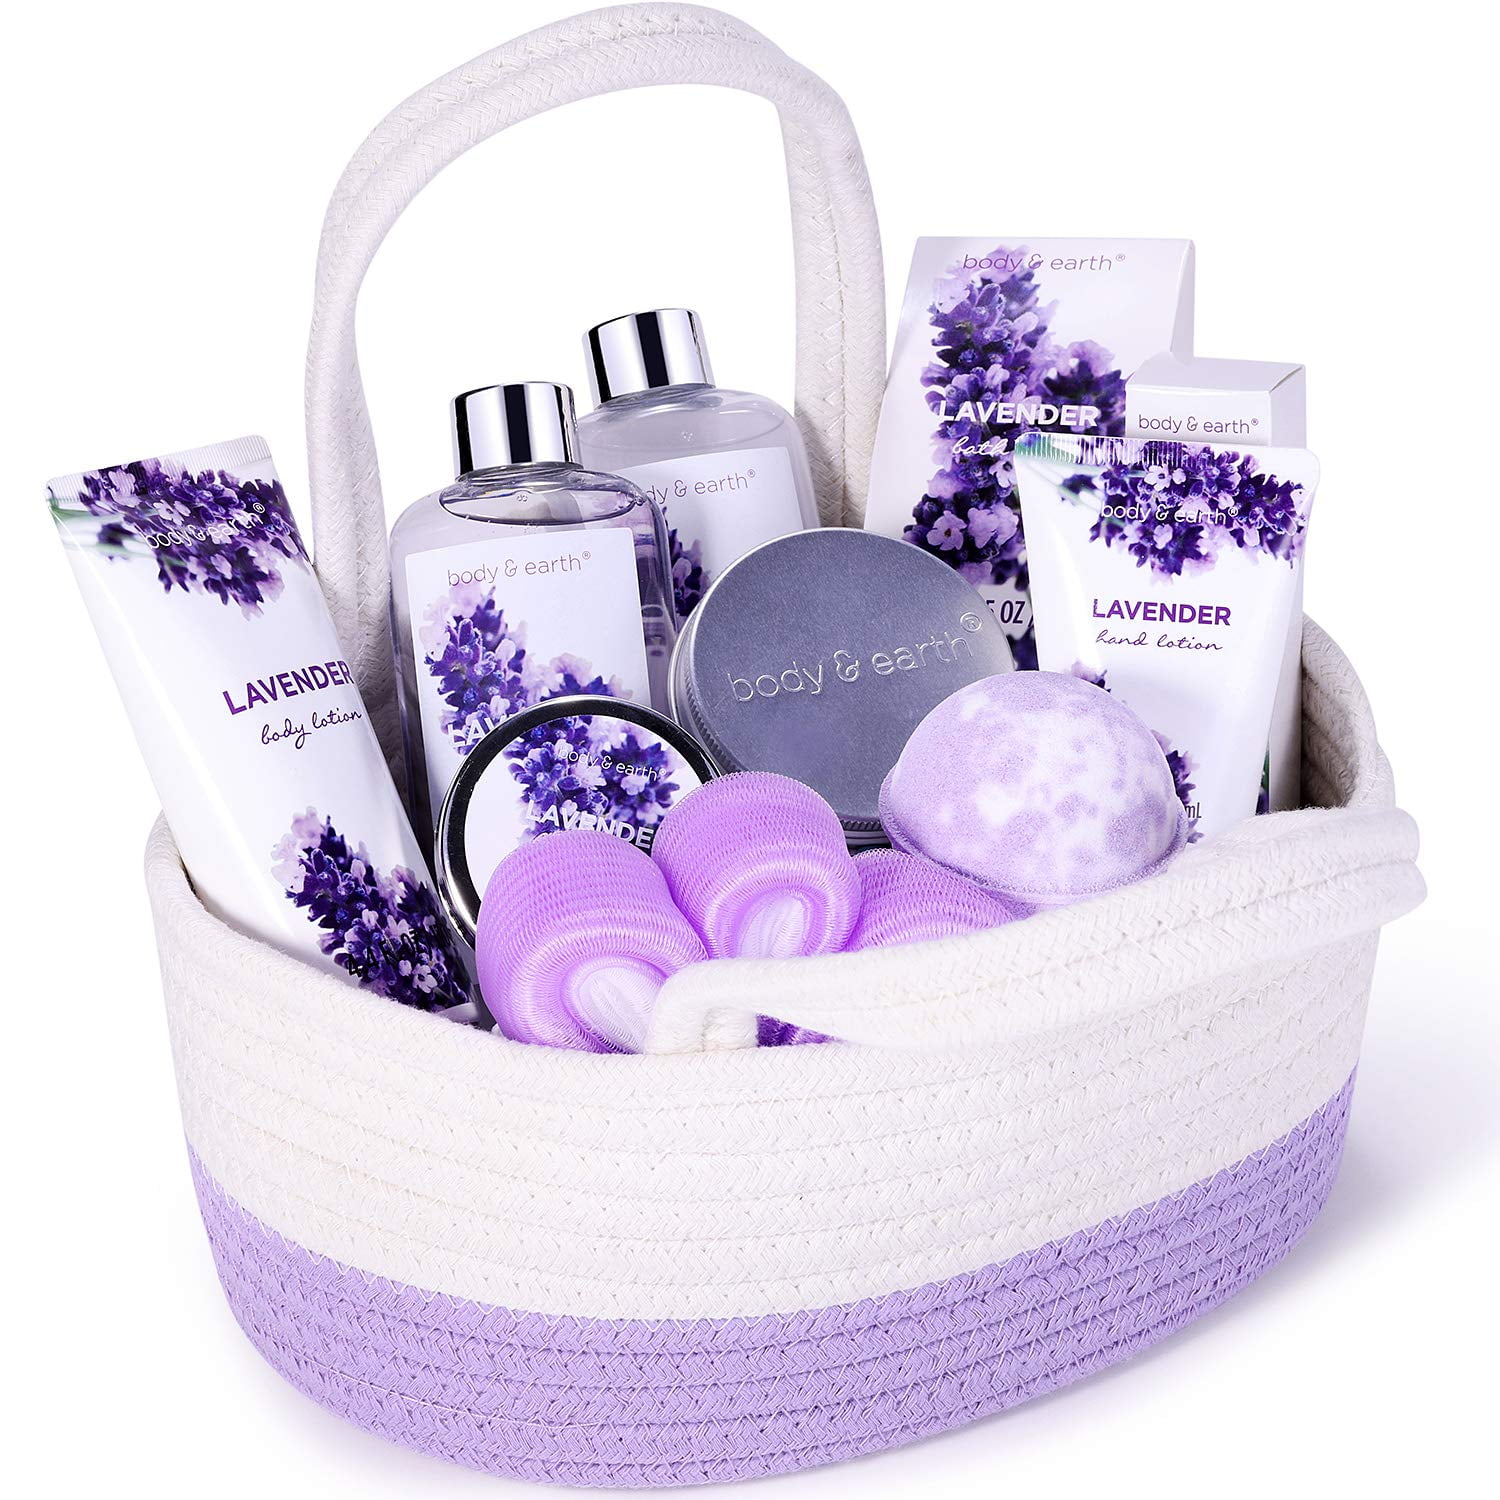 Gifts Set For Women - Christmas Basket Gift Set Ideas Relaxing Spa